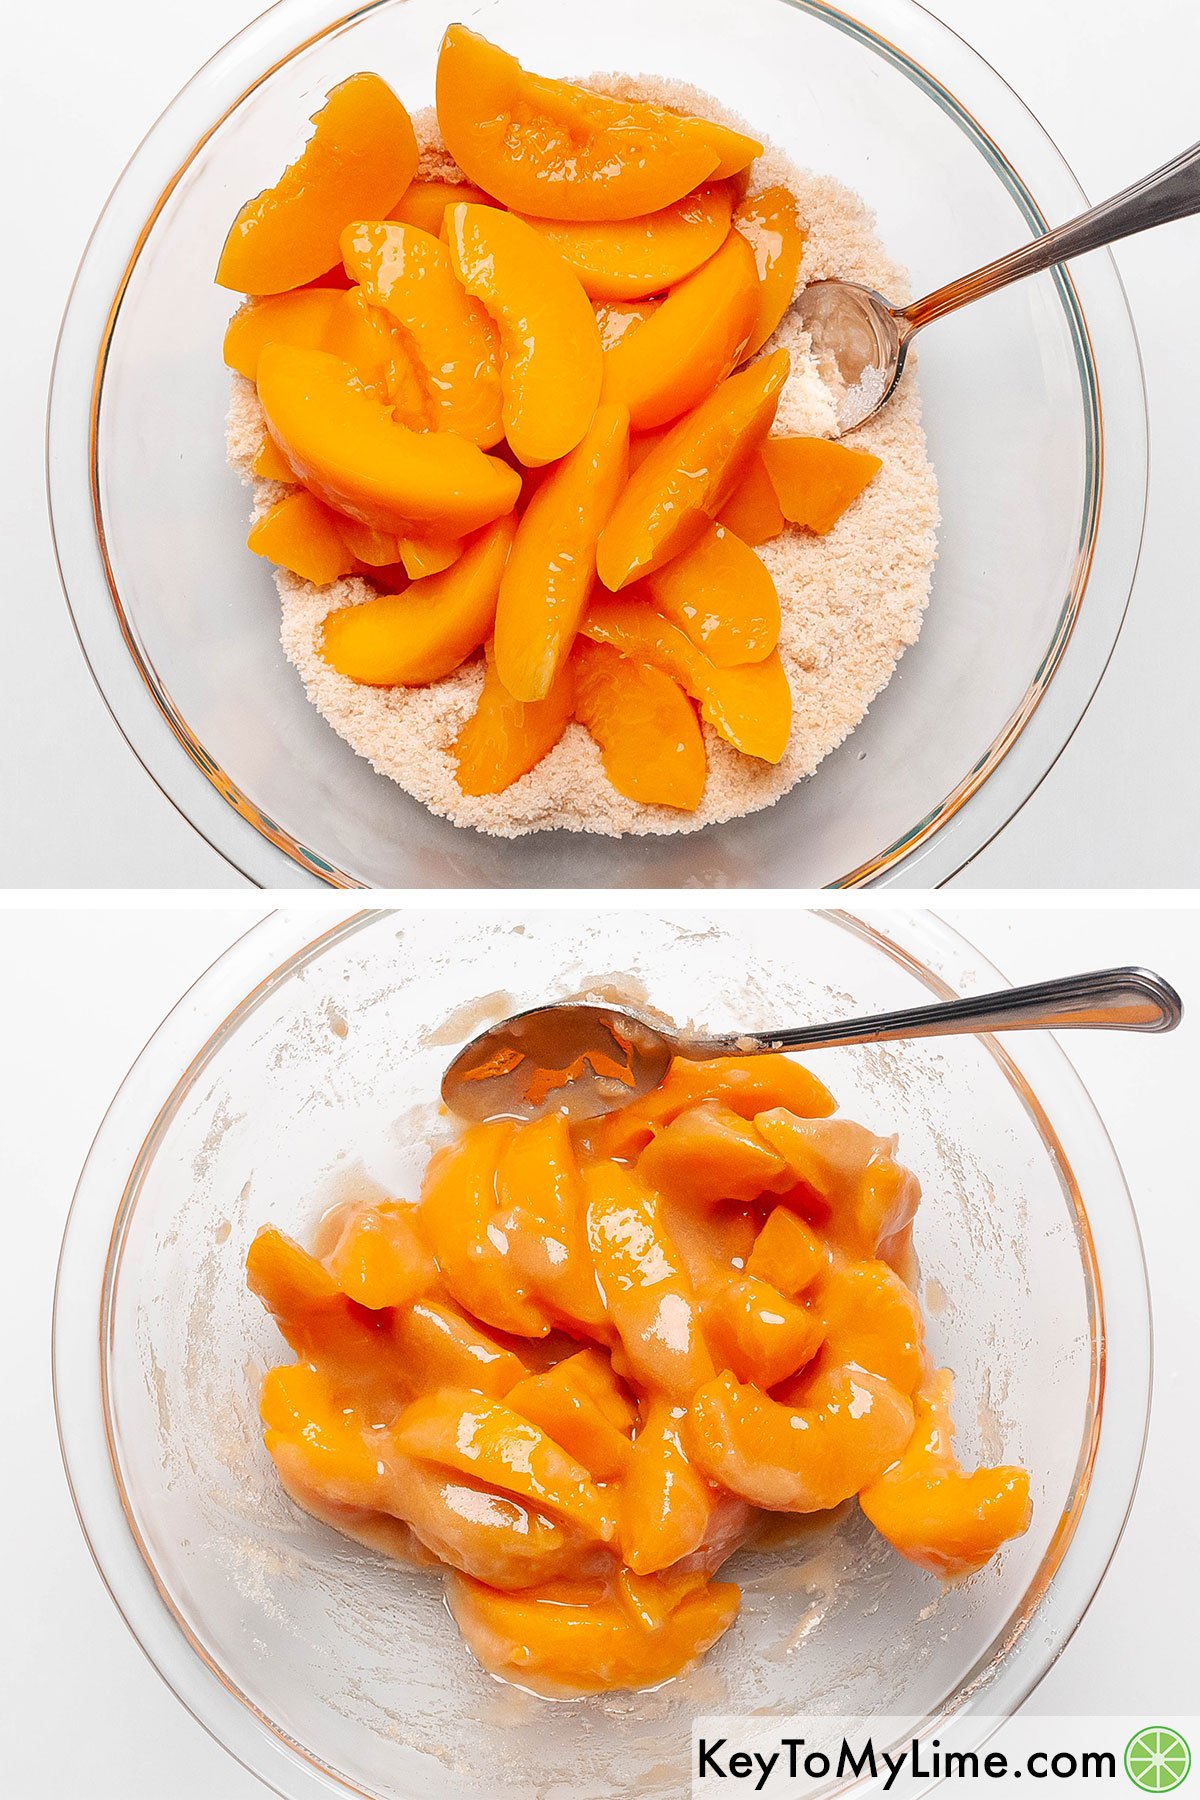 Coating canned sliced peaches in sugar and brown sugar.